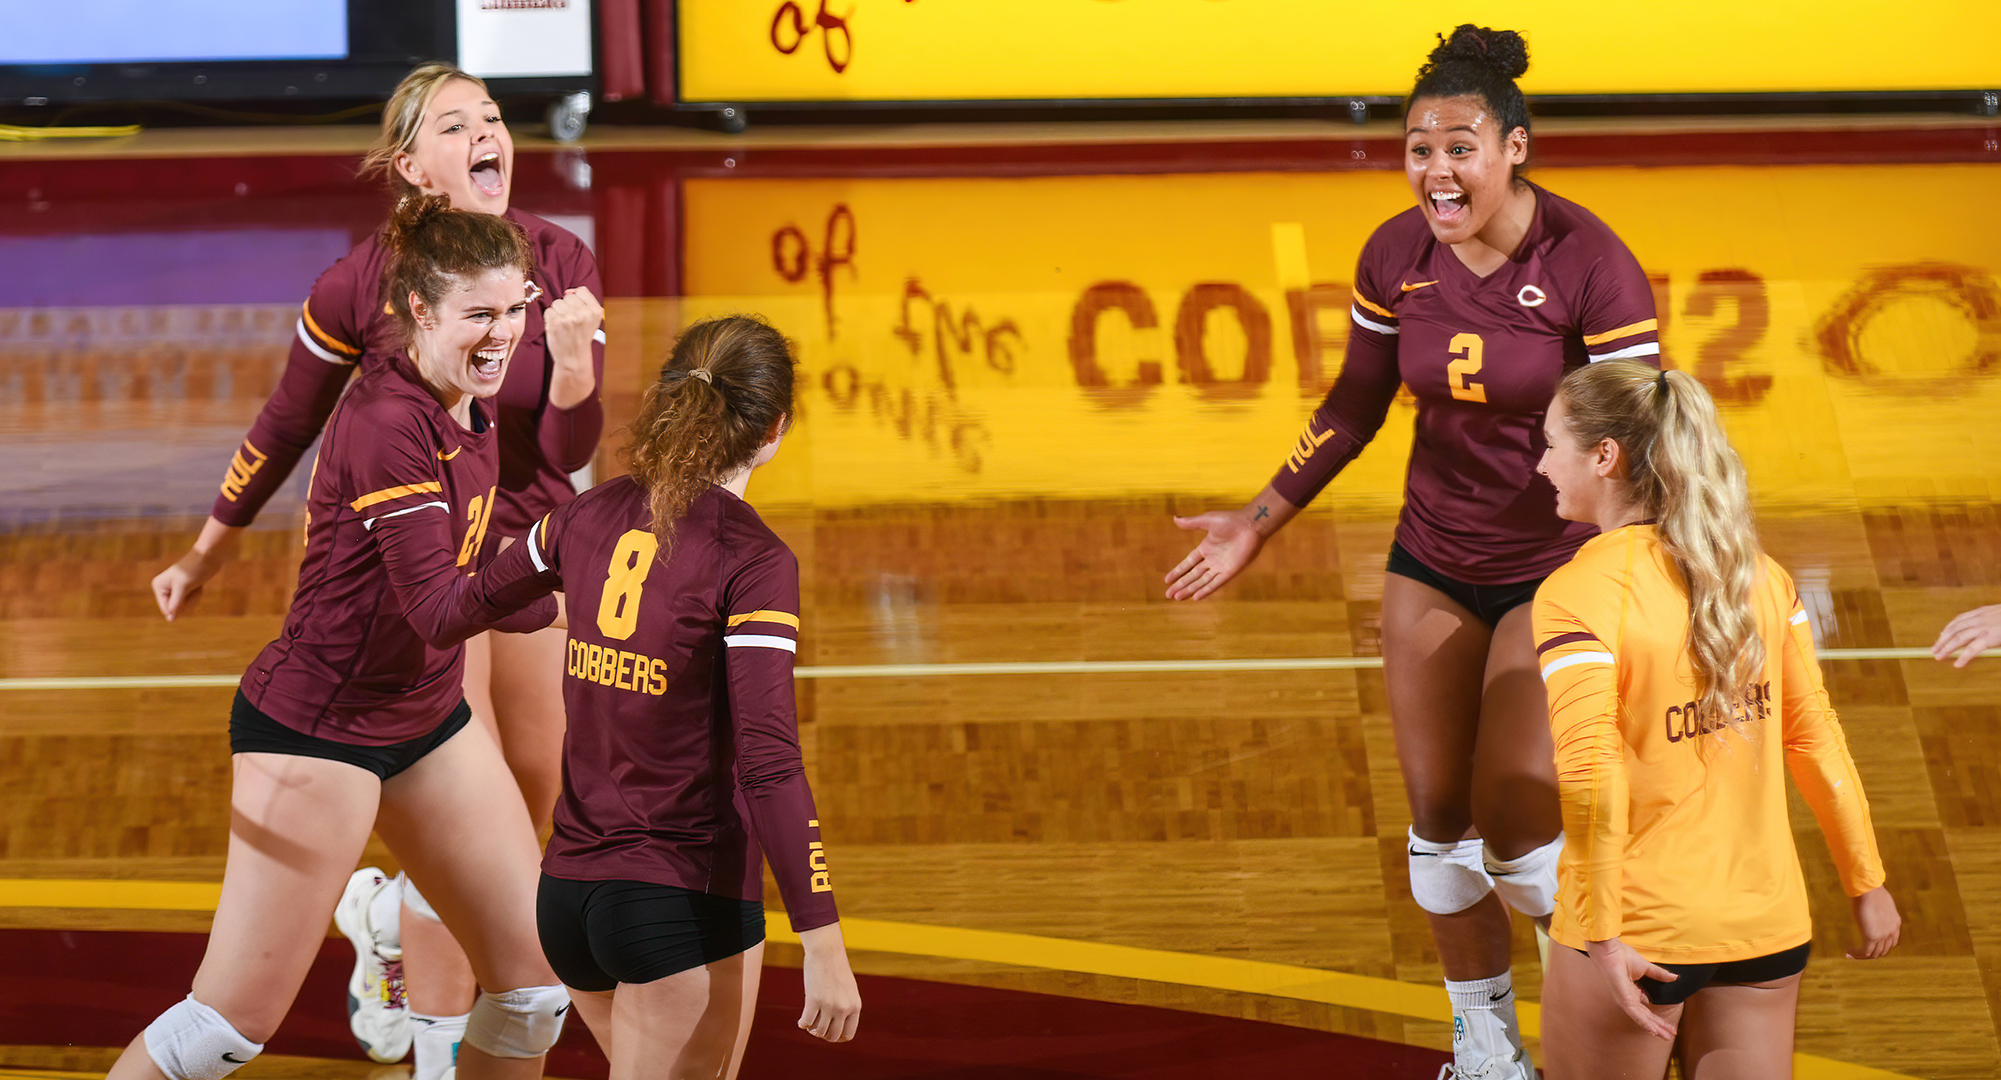 Concordia stormed back from a 2-1 deficit and beat St. Catherine 3-2 to earn their second straight victory and first MIAC win.